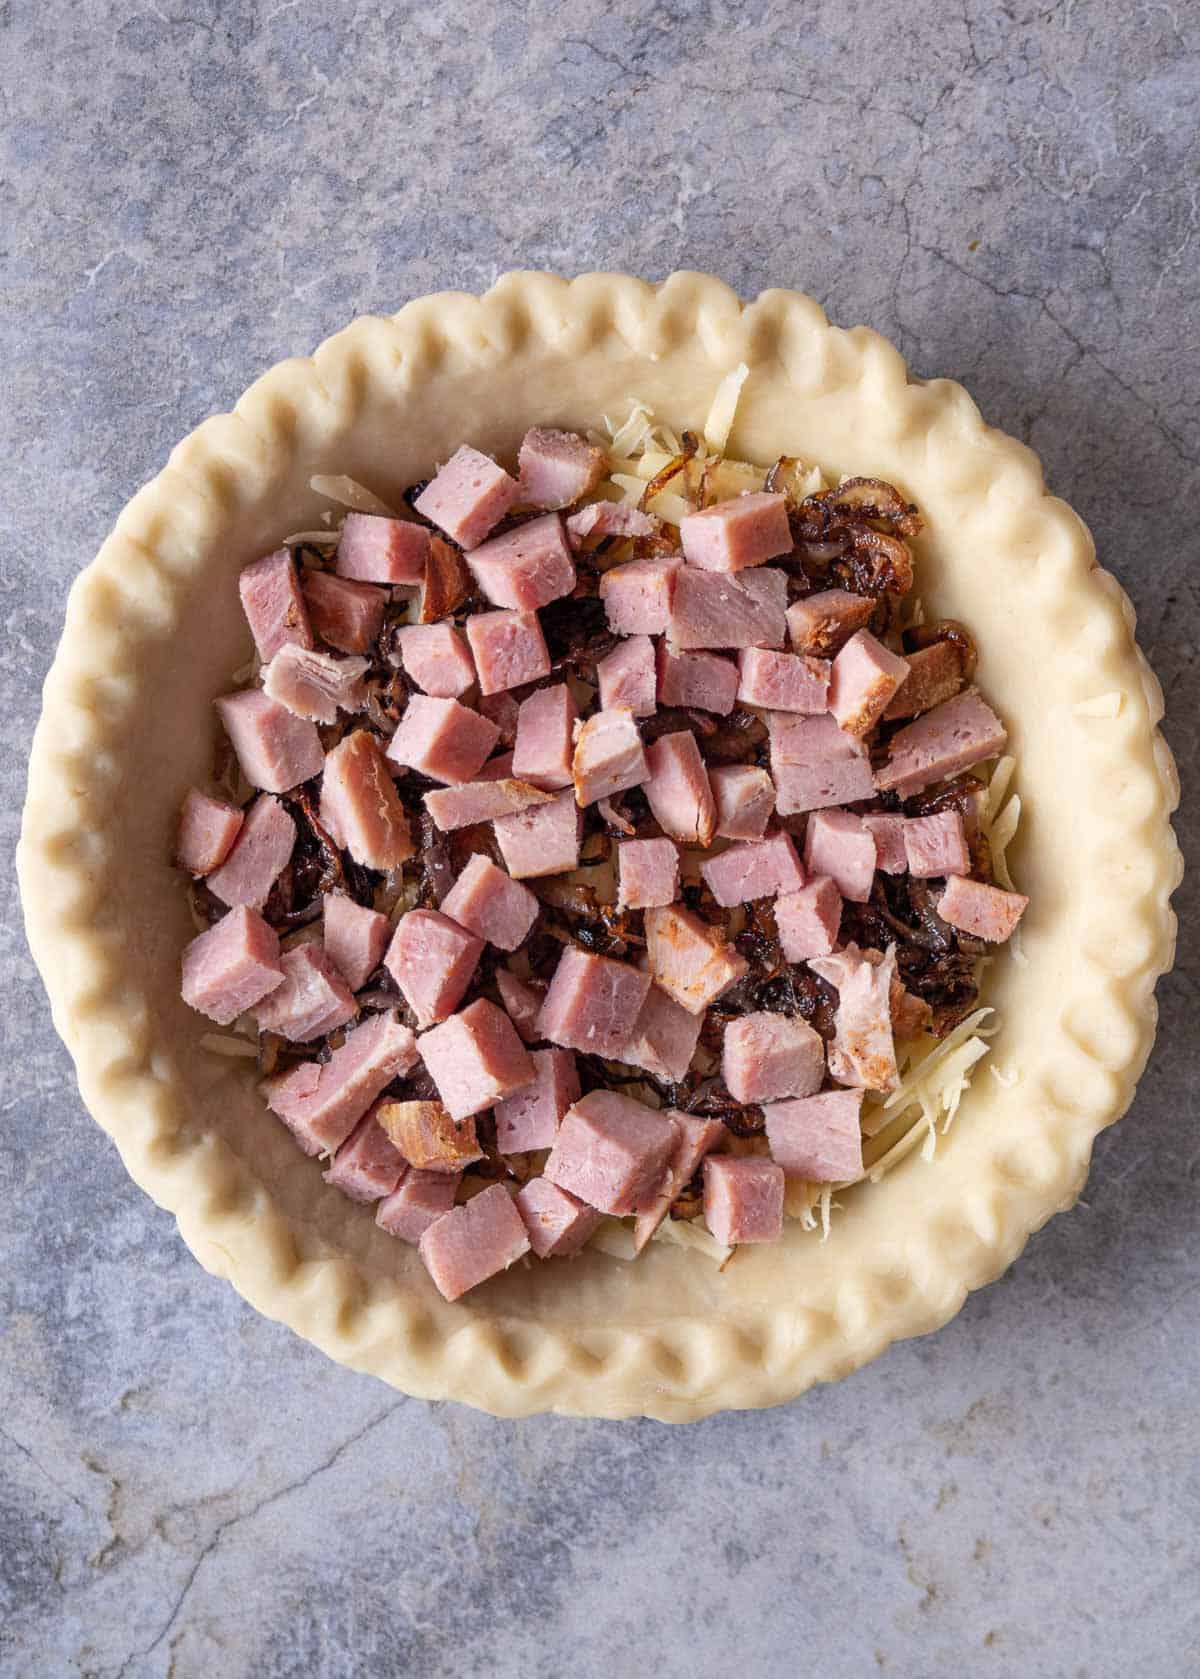 layering ingredients into a pie crust to make a ham quiche